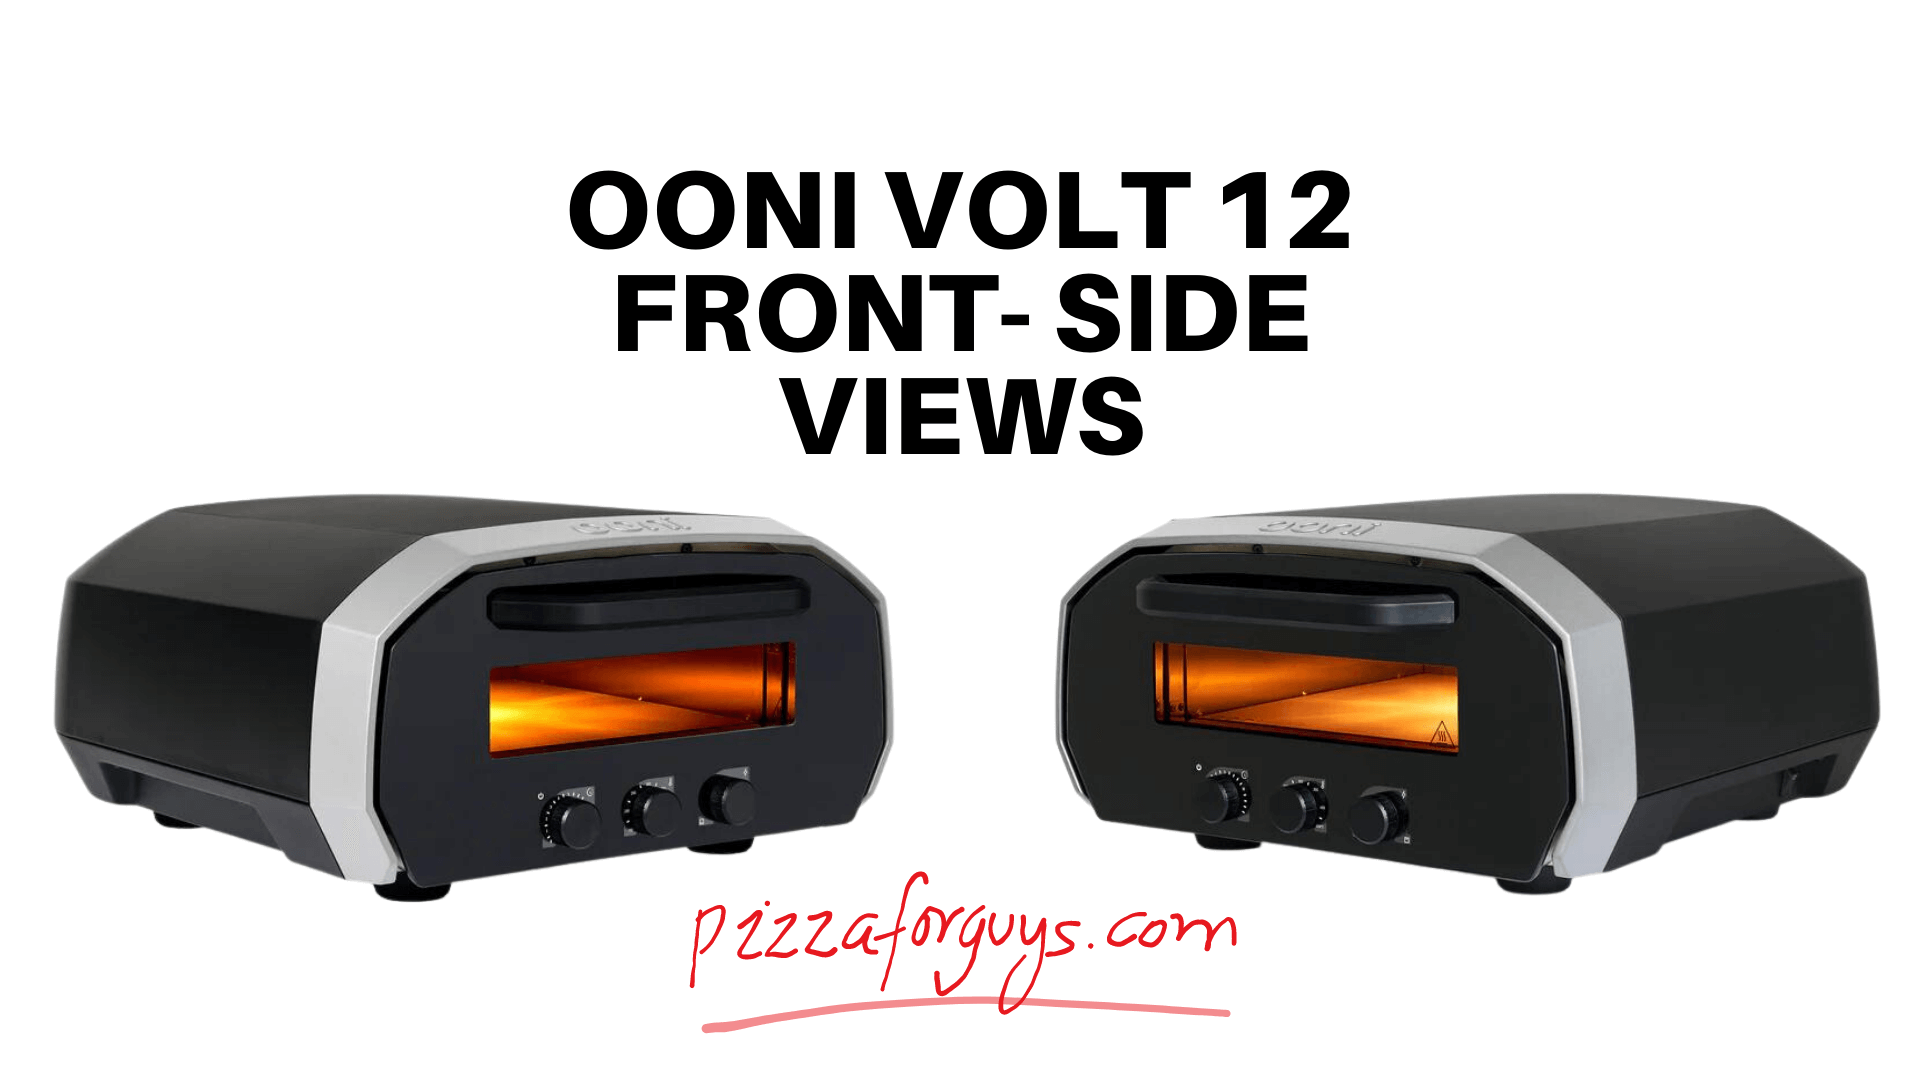 Front-side views of ooni volt 12 pizza oven